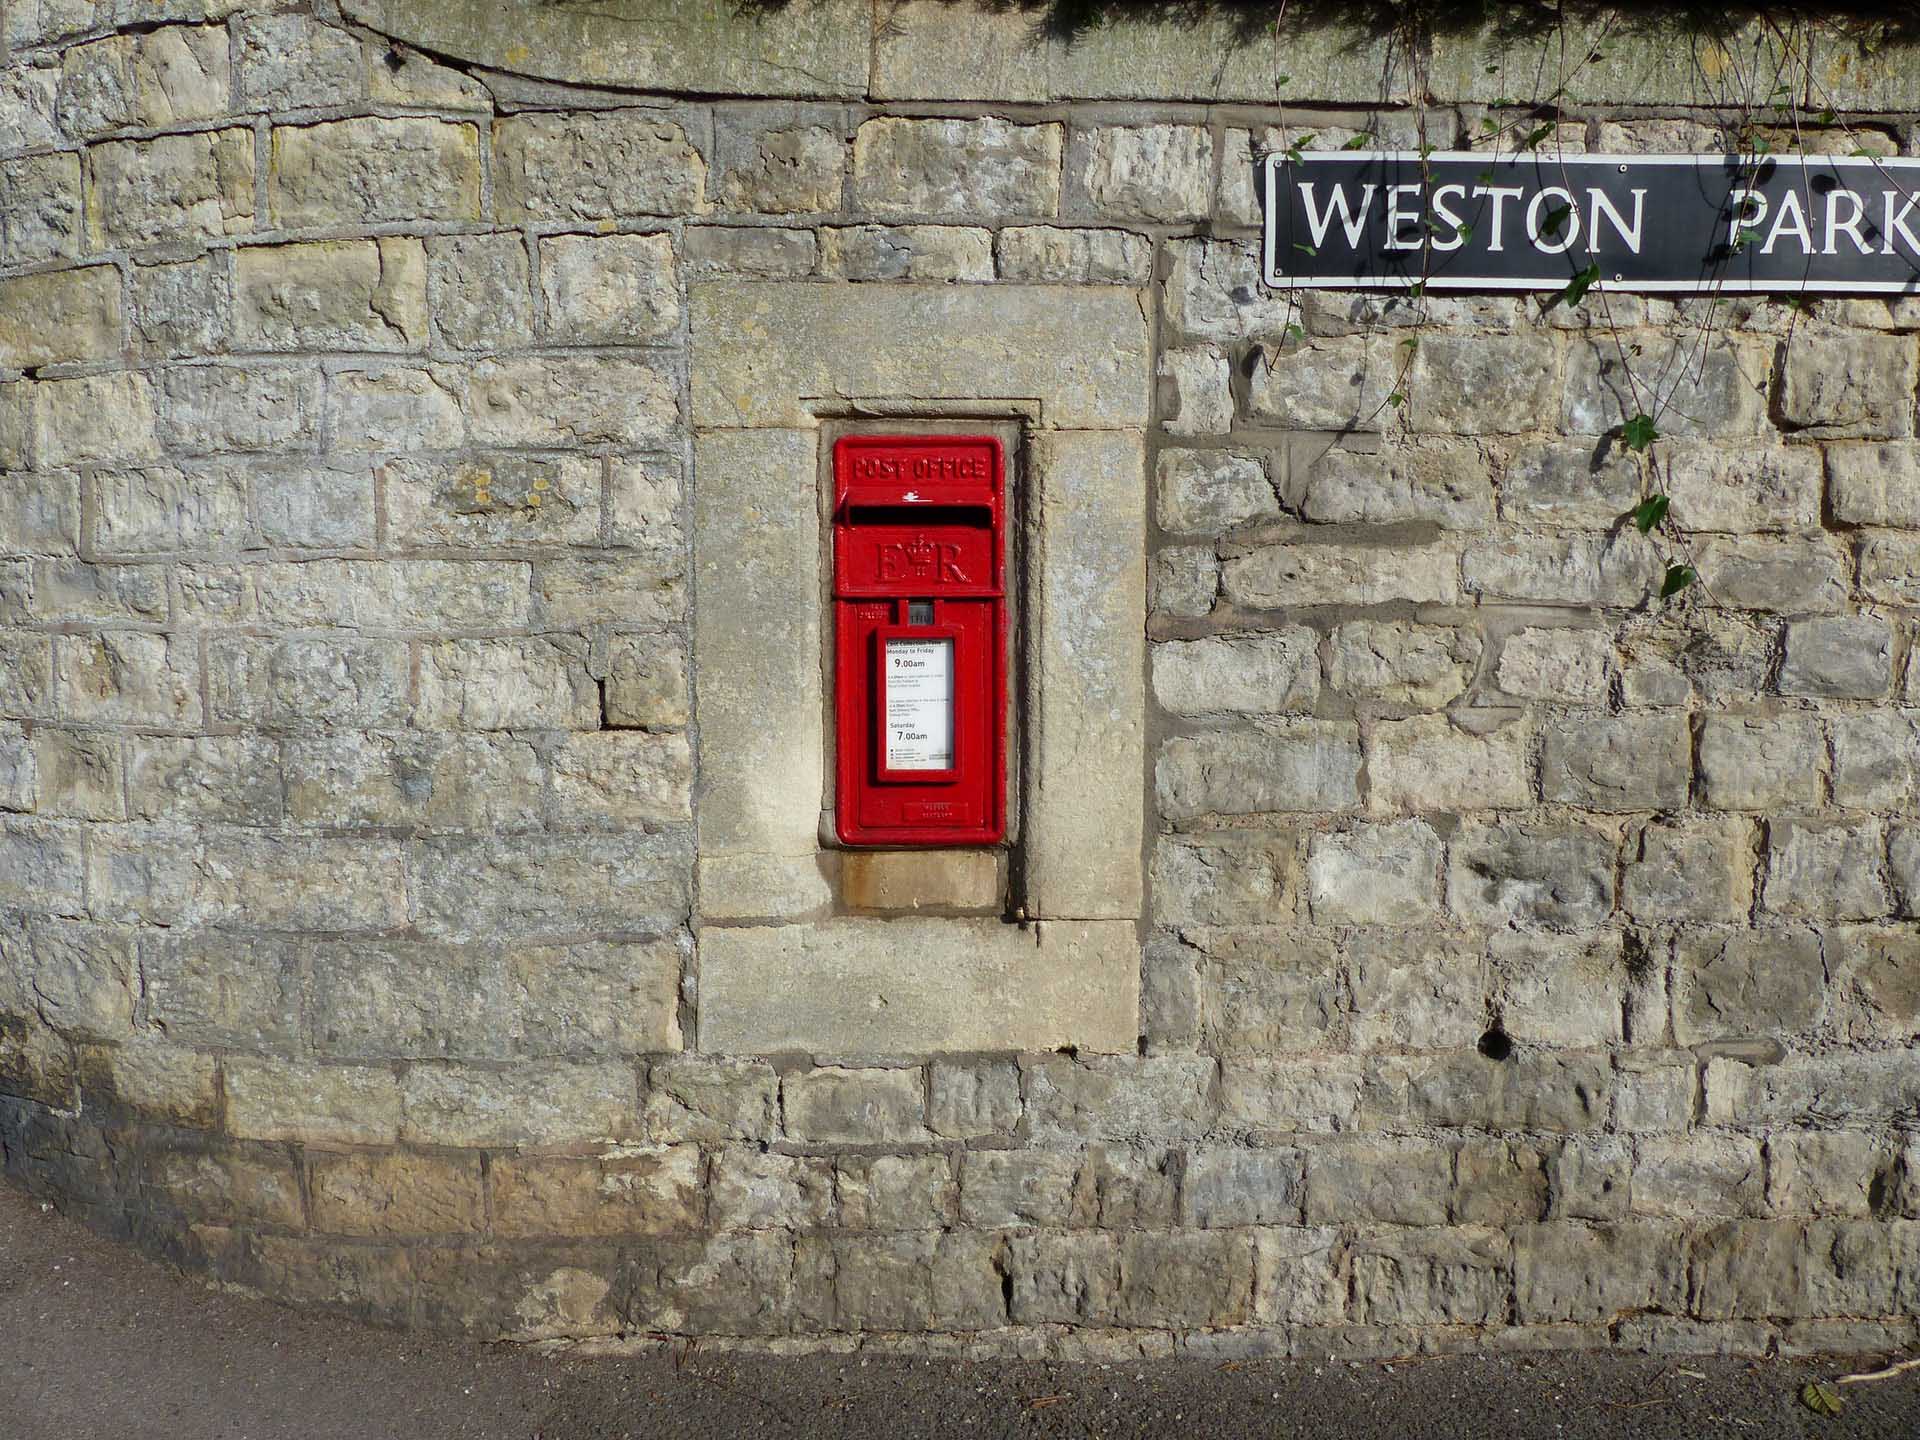 A red english mailbox below a sign that reads "Weston Park"